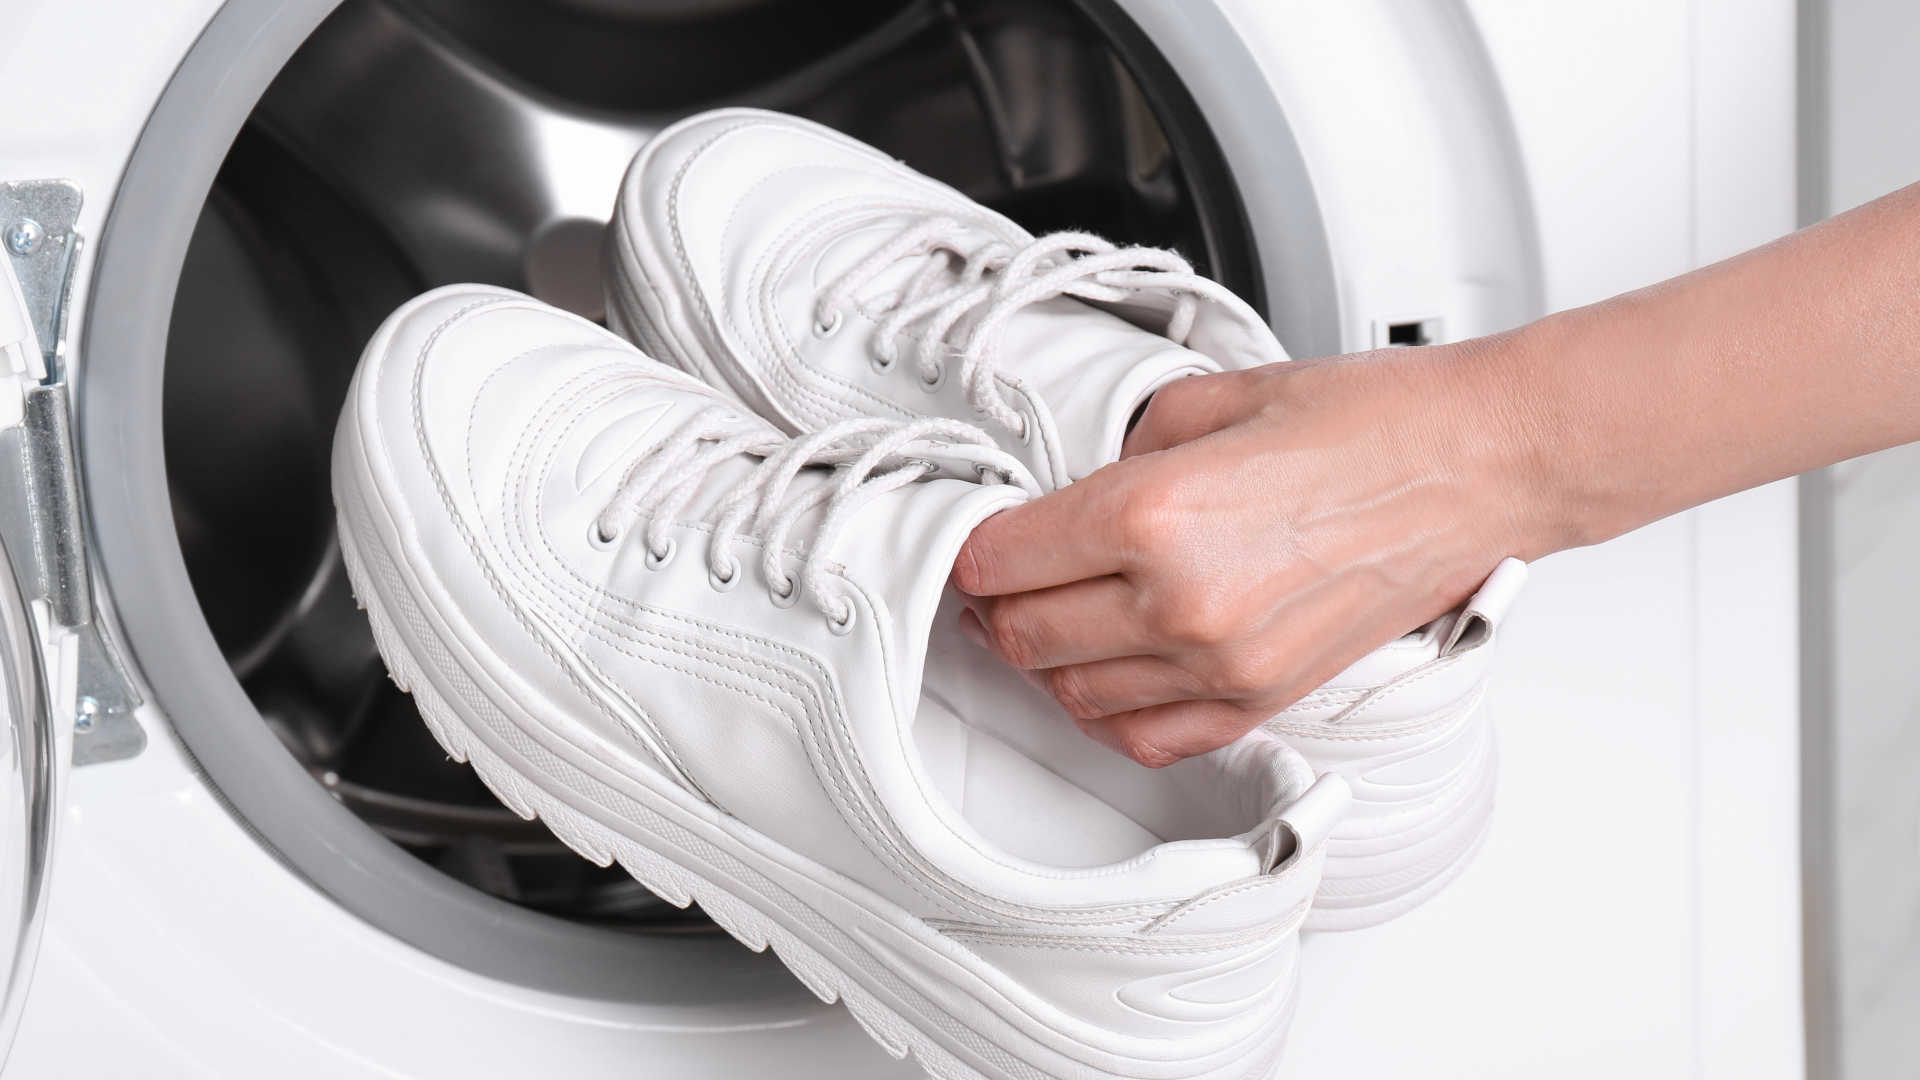 How To Wash Sneakers: A Step-By-Step To New Looking Shoes